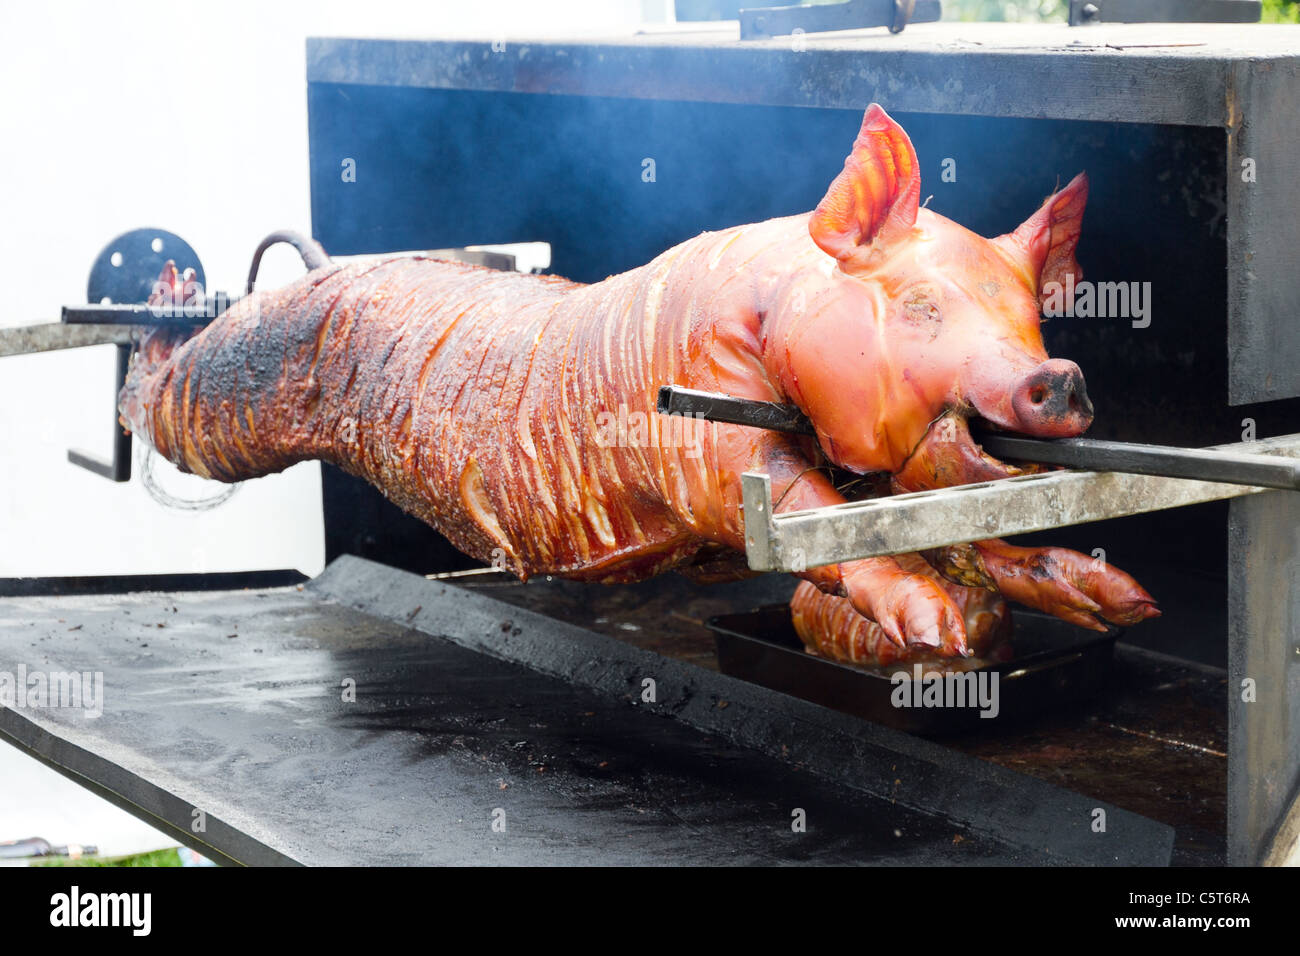 Whole pig on spit being roasted Stock Photo